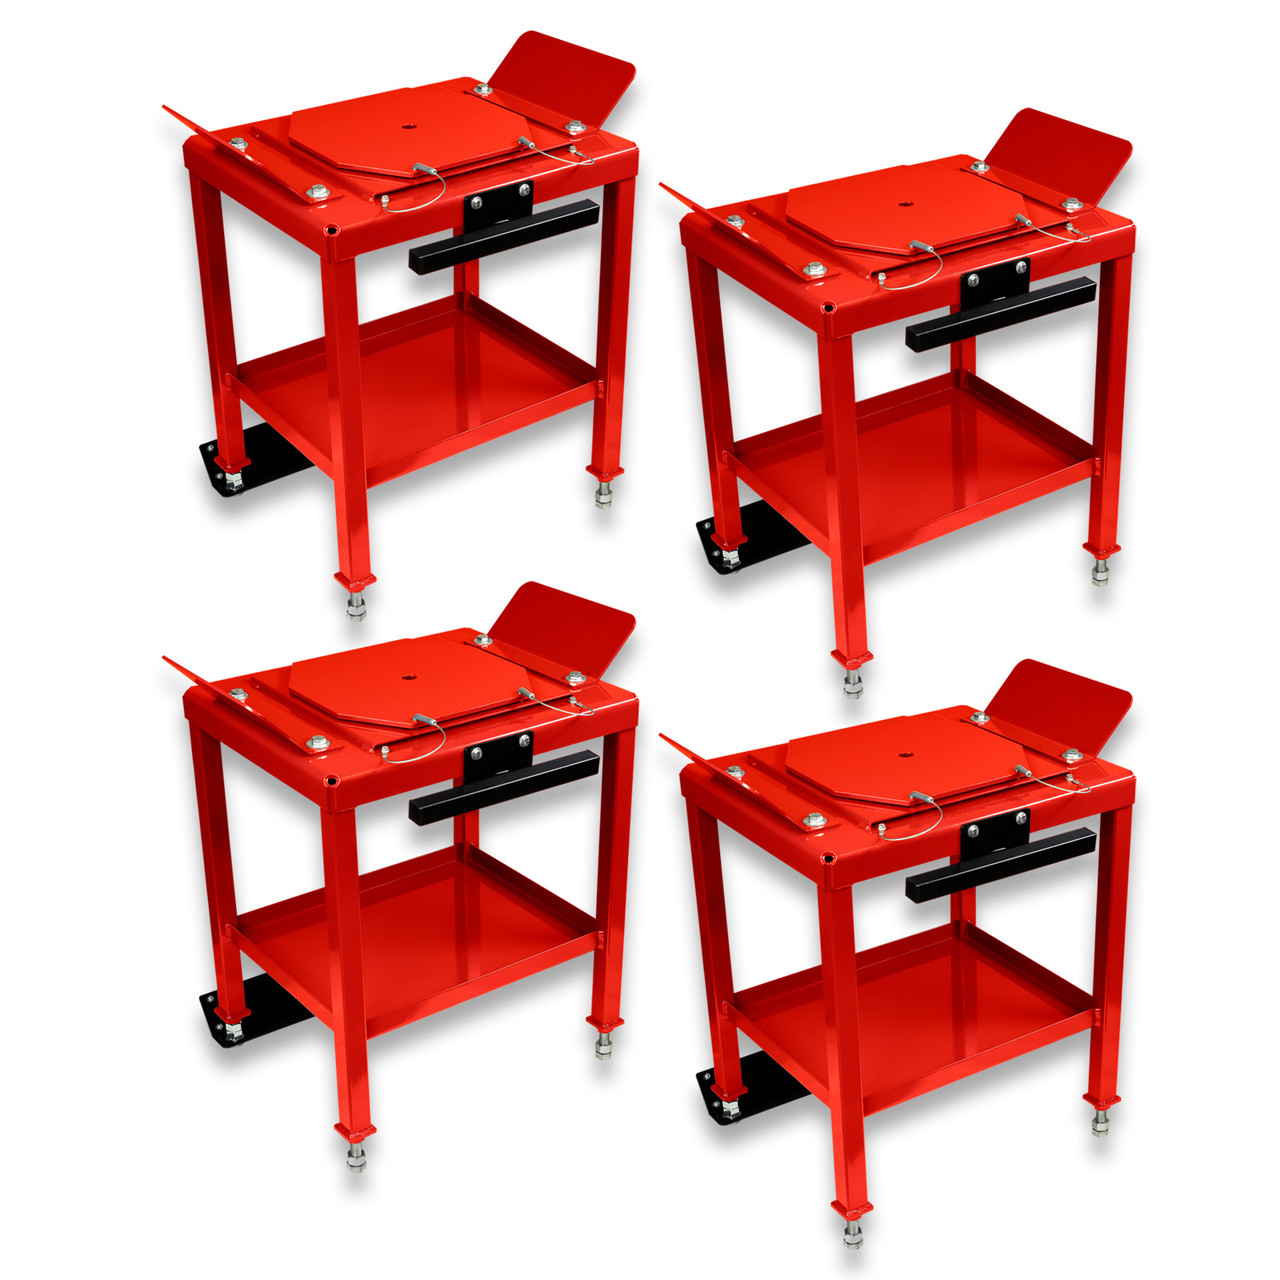 DB28 - 28" Portable Medium Duty Alignment Stand Set with Built-In Turn Plates & Slip Plates by QSP | McBay Performance